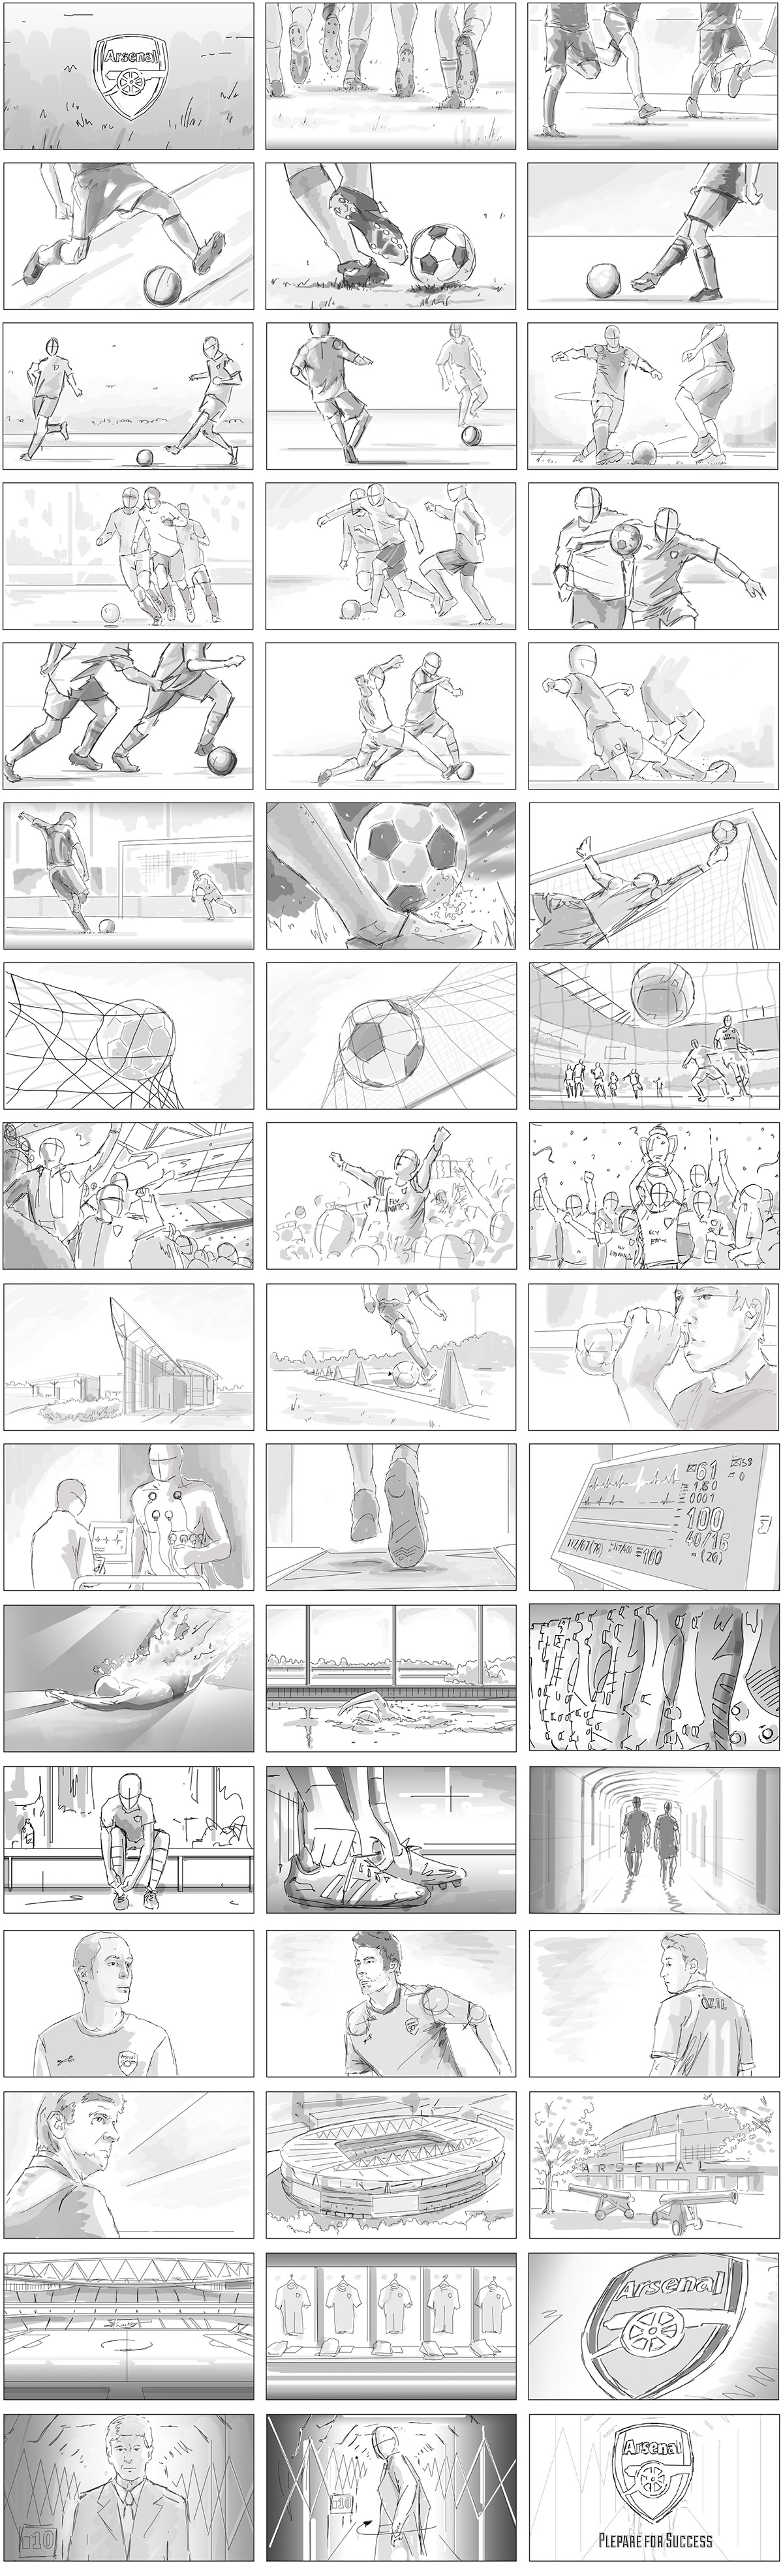 storyboard advertisement conceptual story board